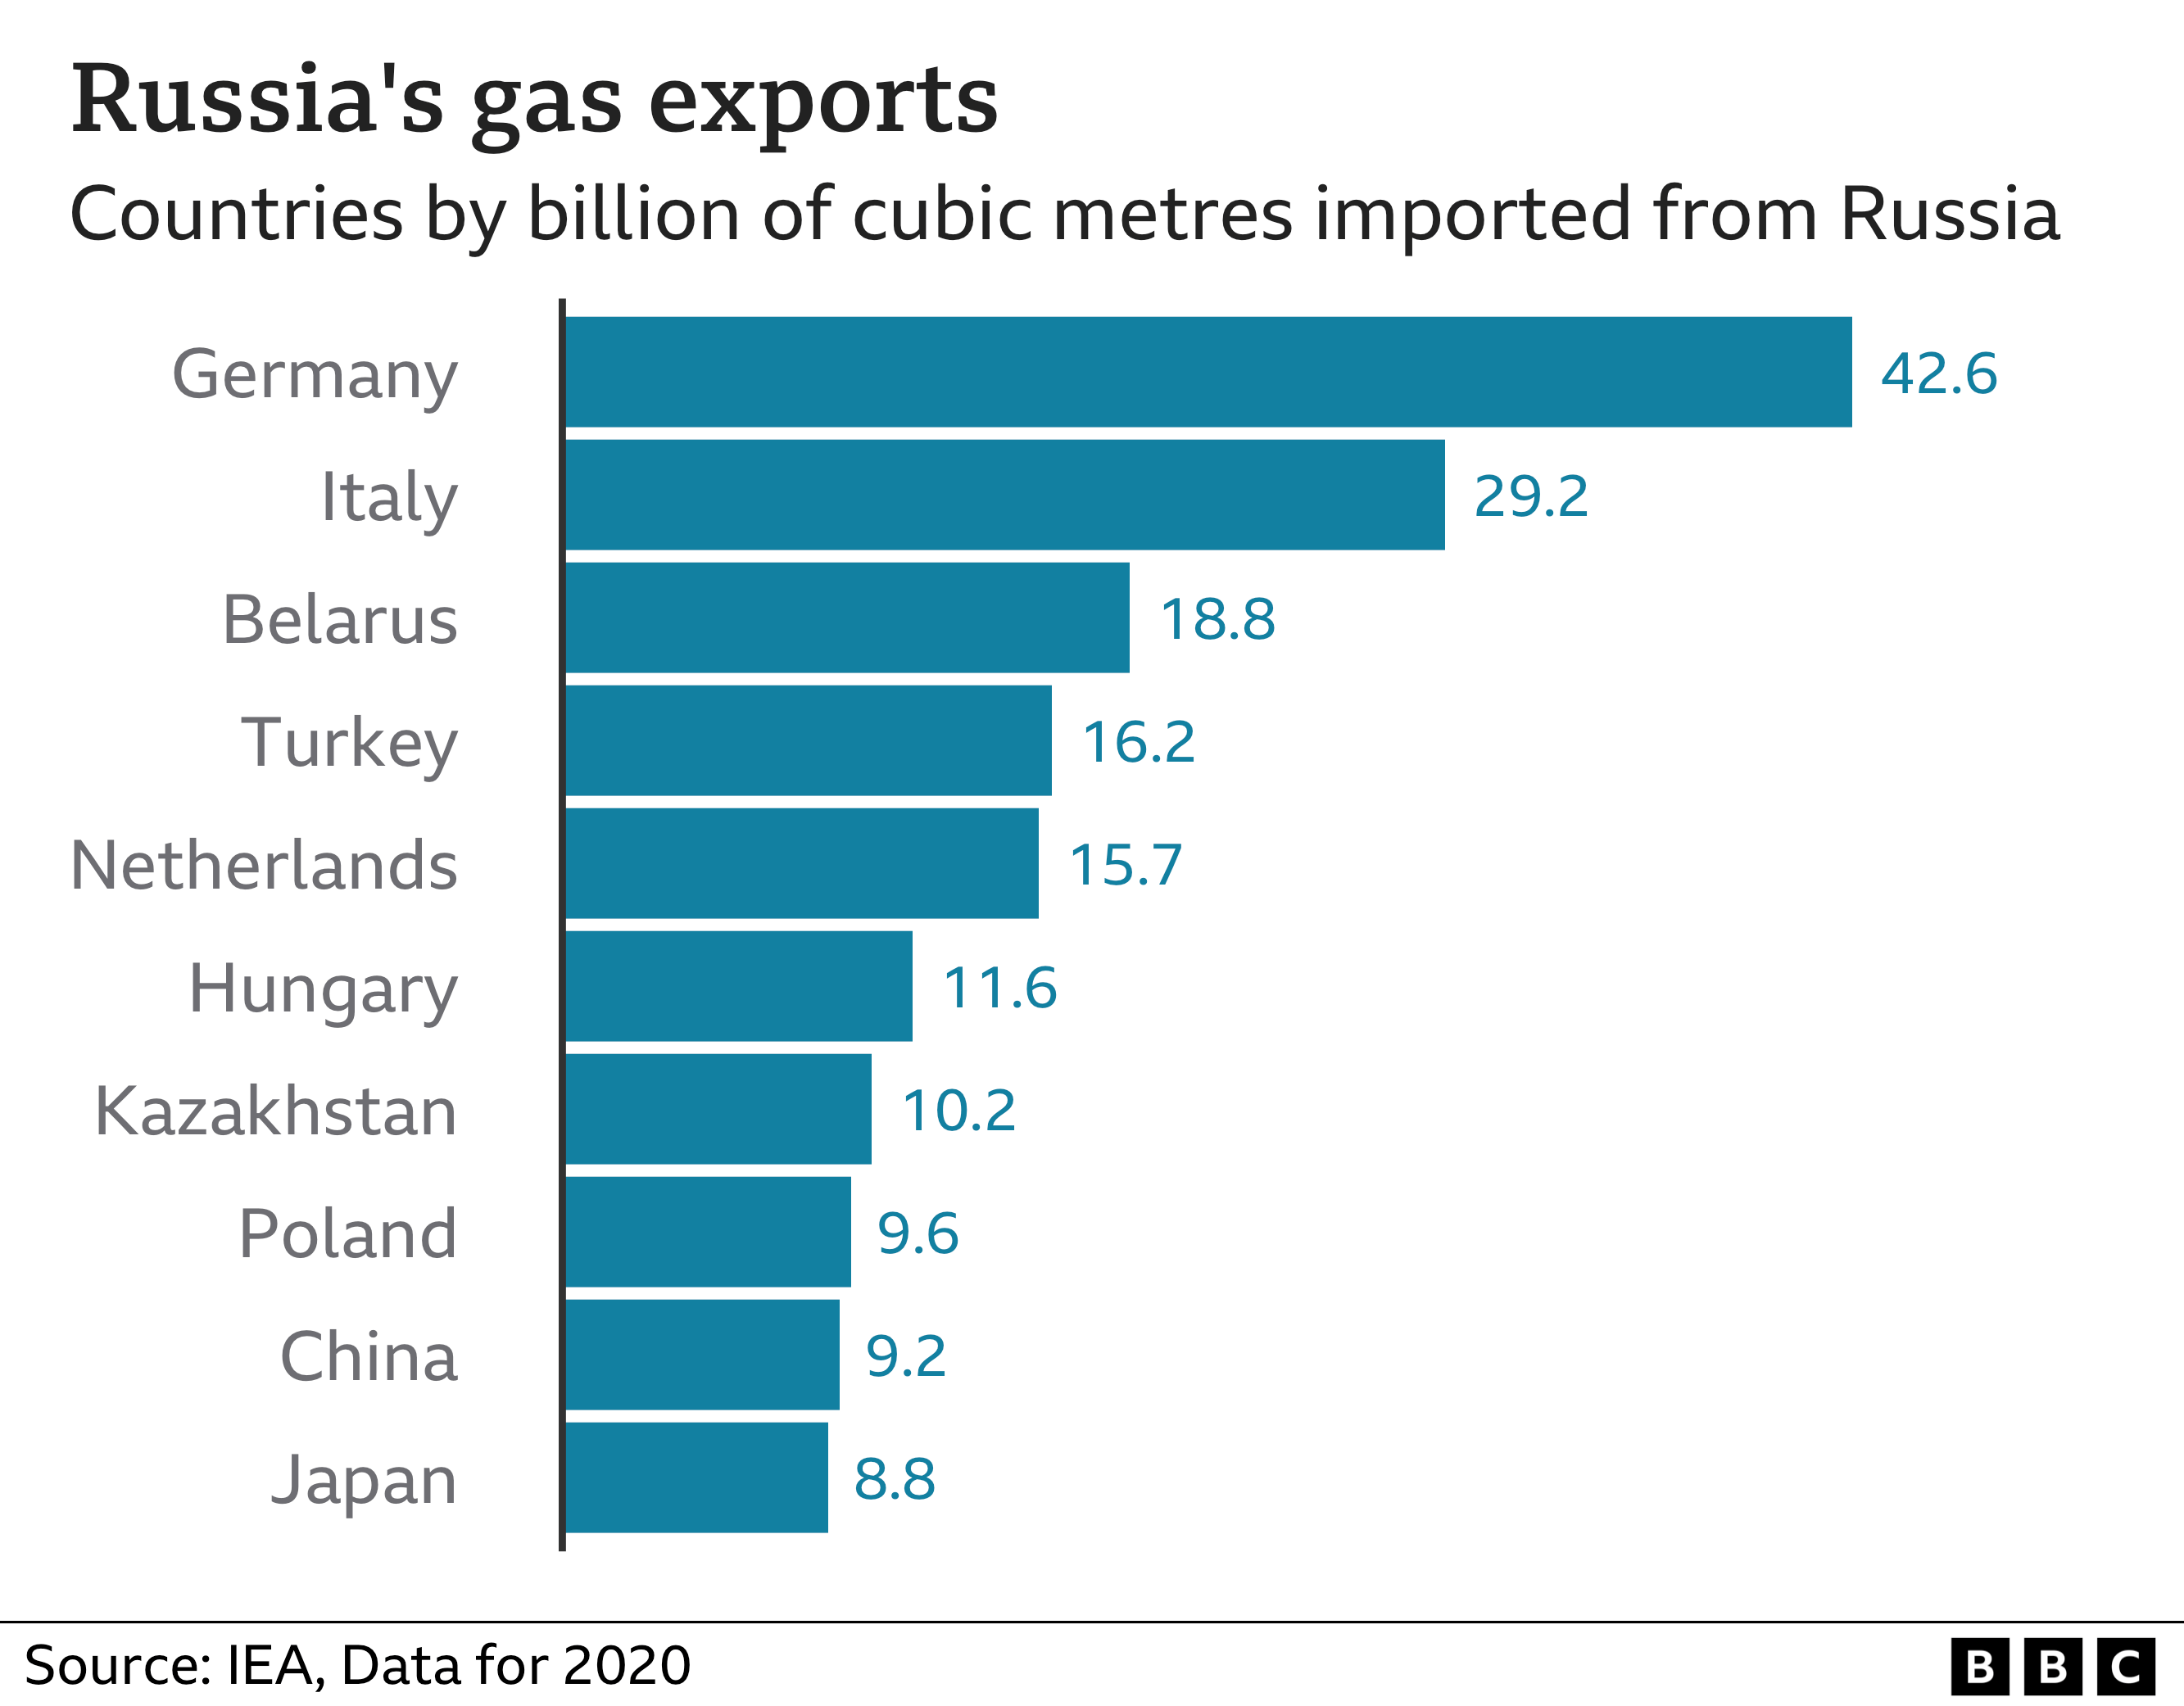 Graph showing Russia's gas exports in countries by billion of cubic metres imported from Russia. Germany comes in top receiving 42.6 billion cubic metres of gas. 